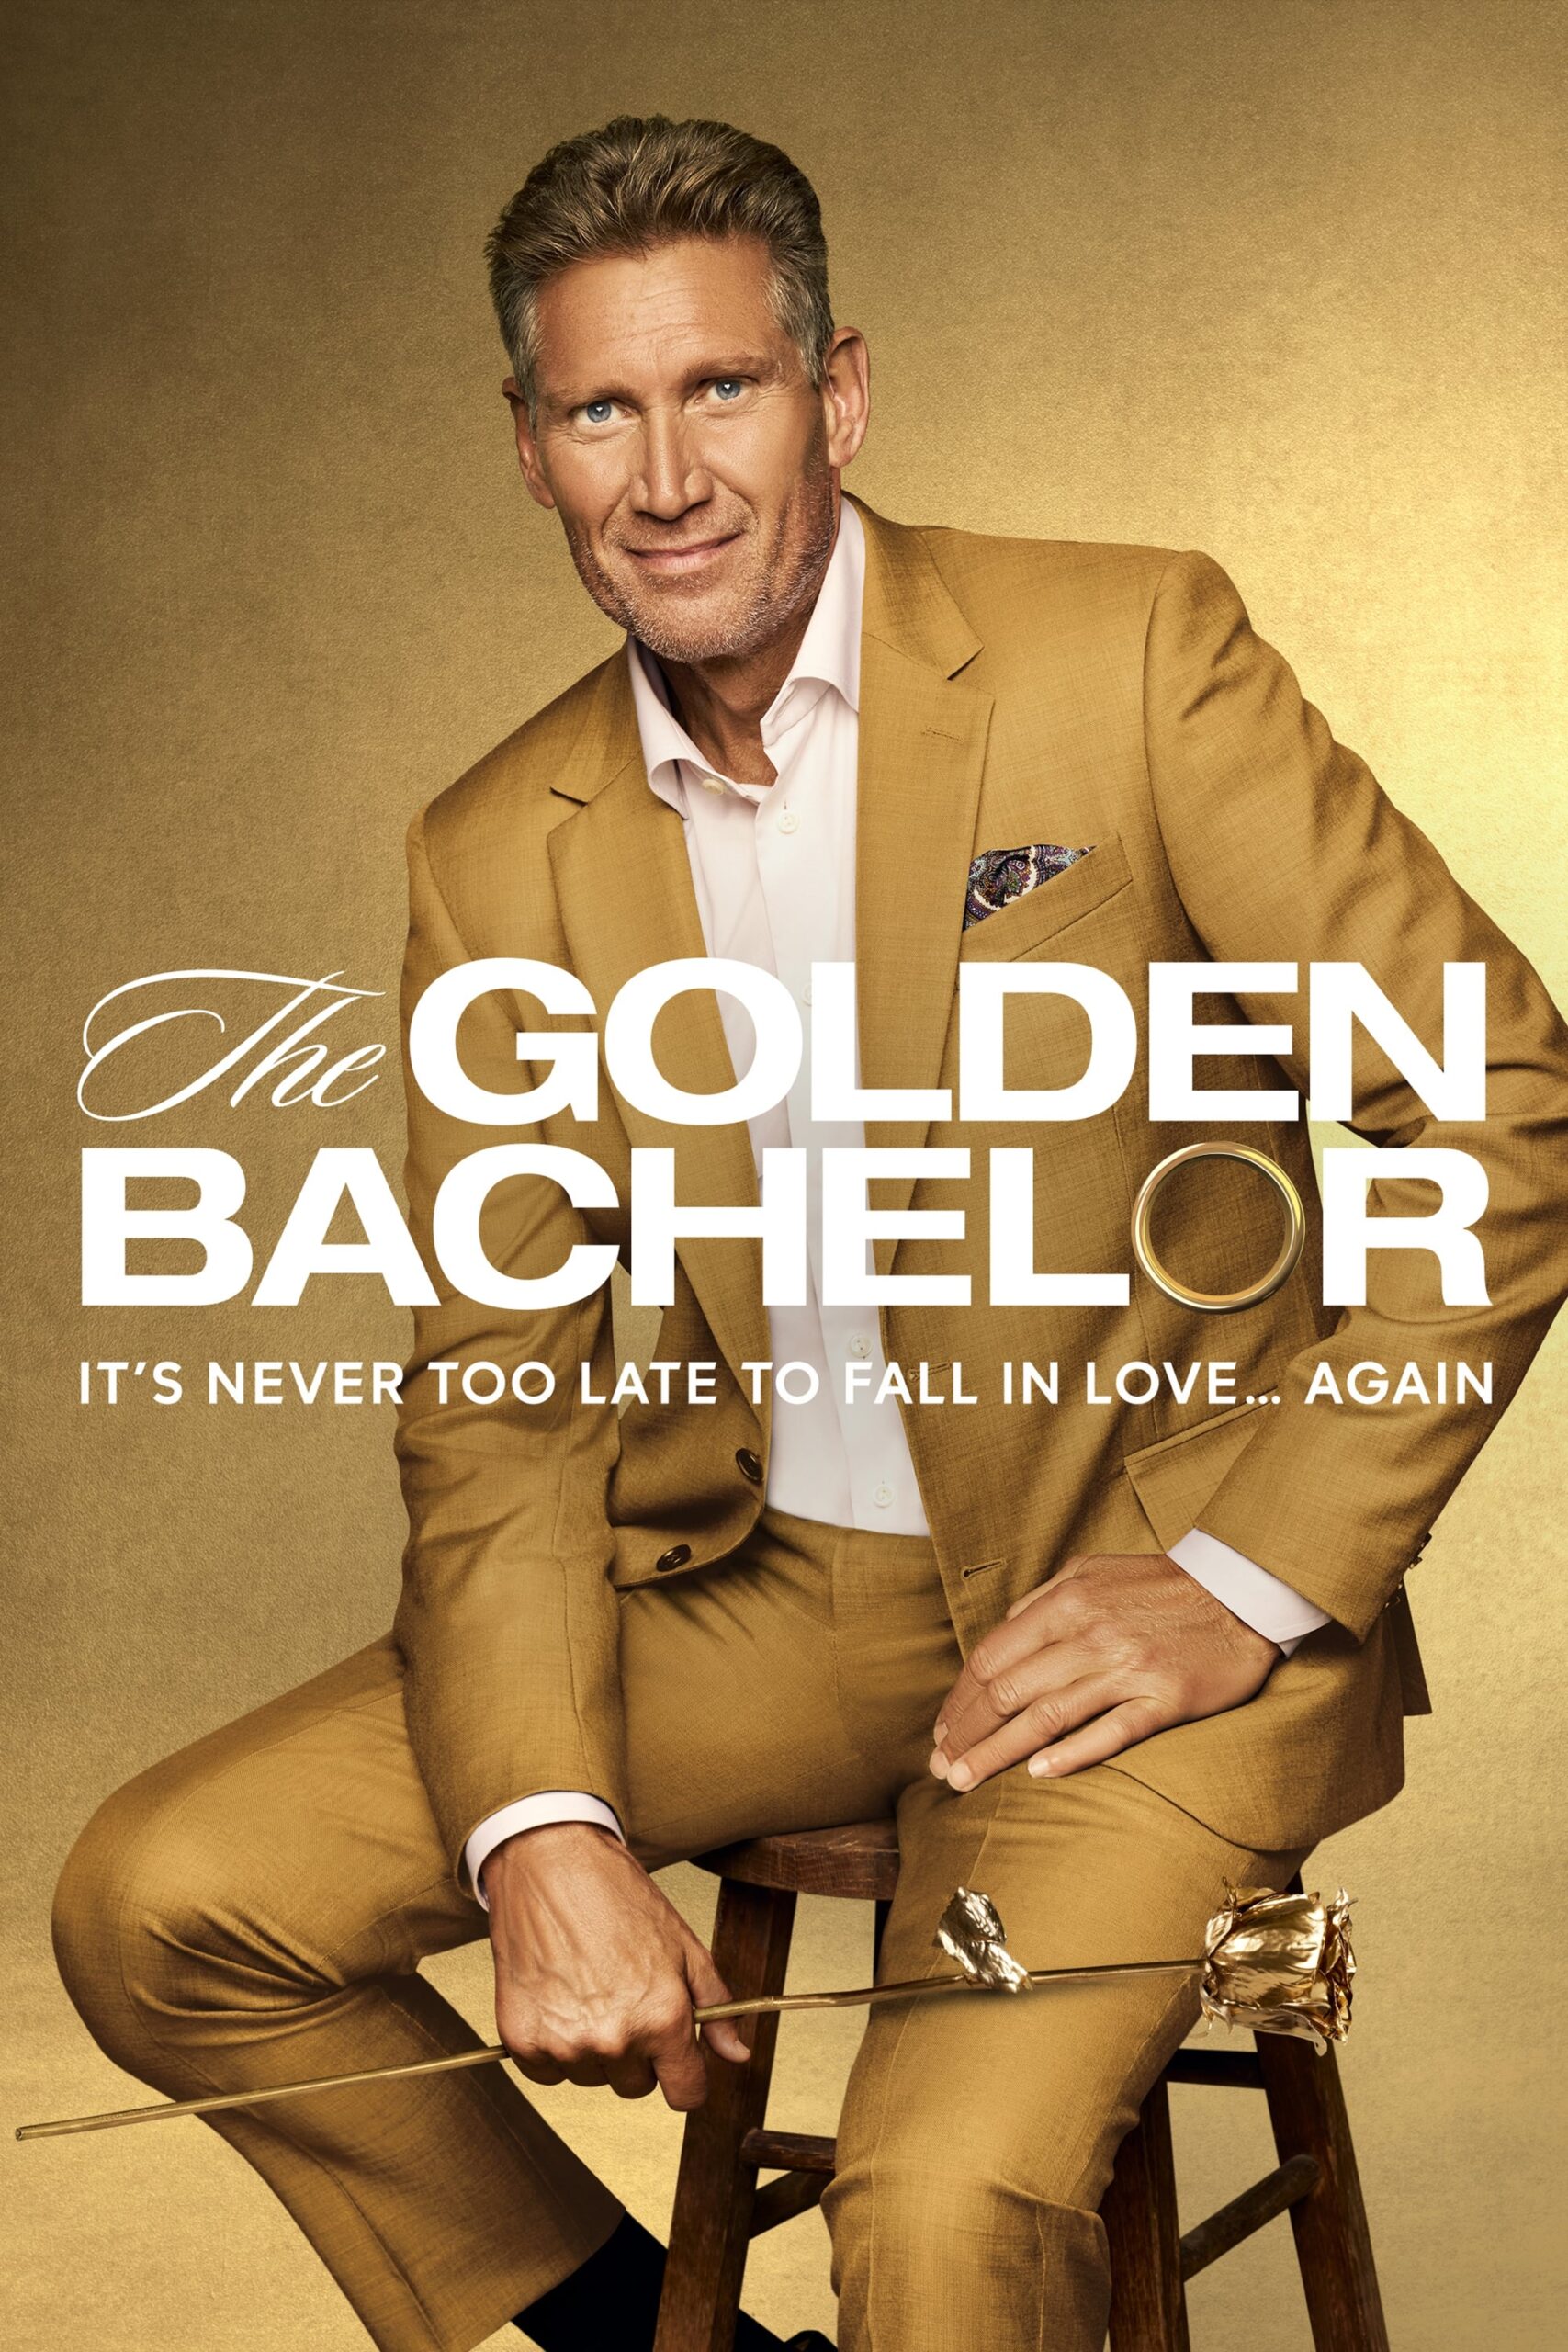 "The Golden Bachelor" Ranks as ABC's No. 1 Series Premiere Ever on Hulu